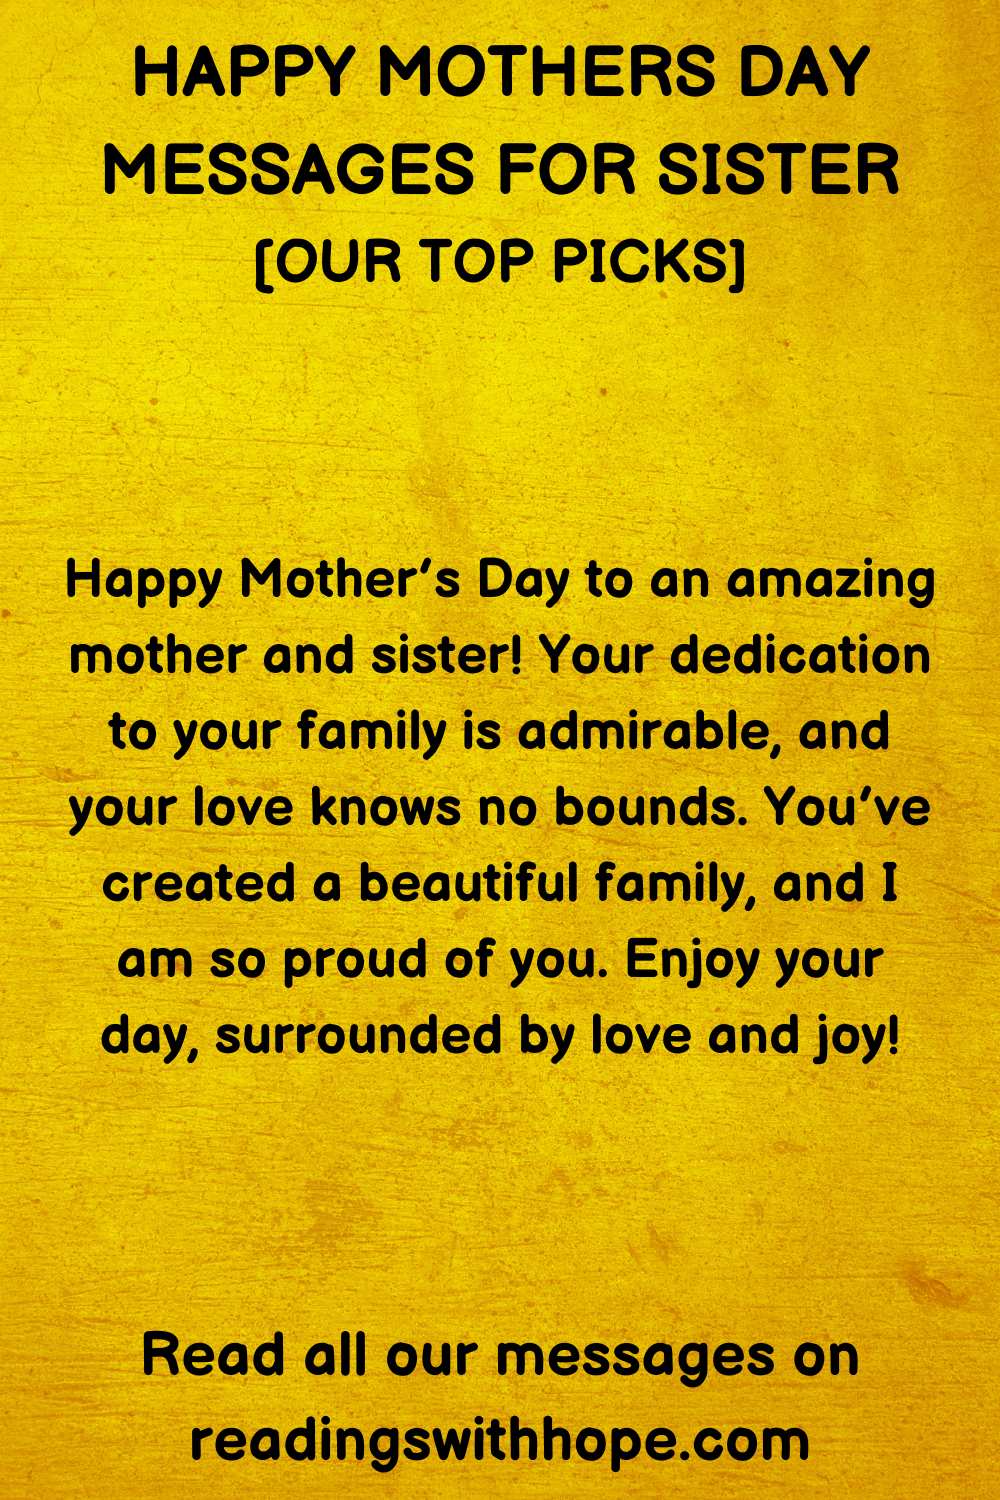 Happy Mothers Day Message for Sister
